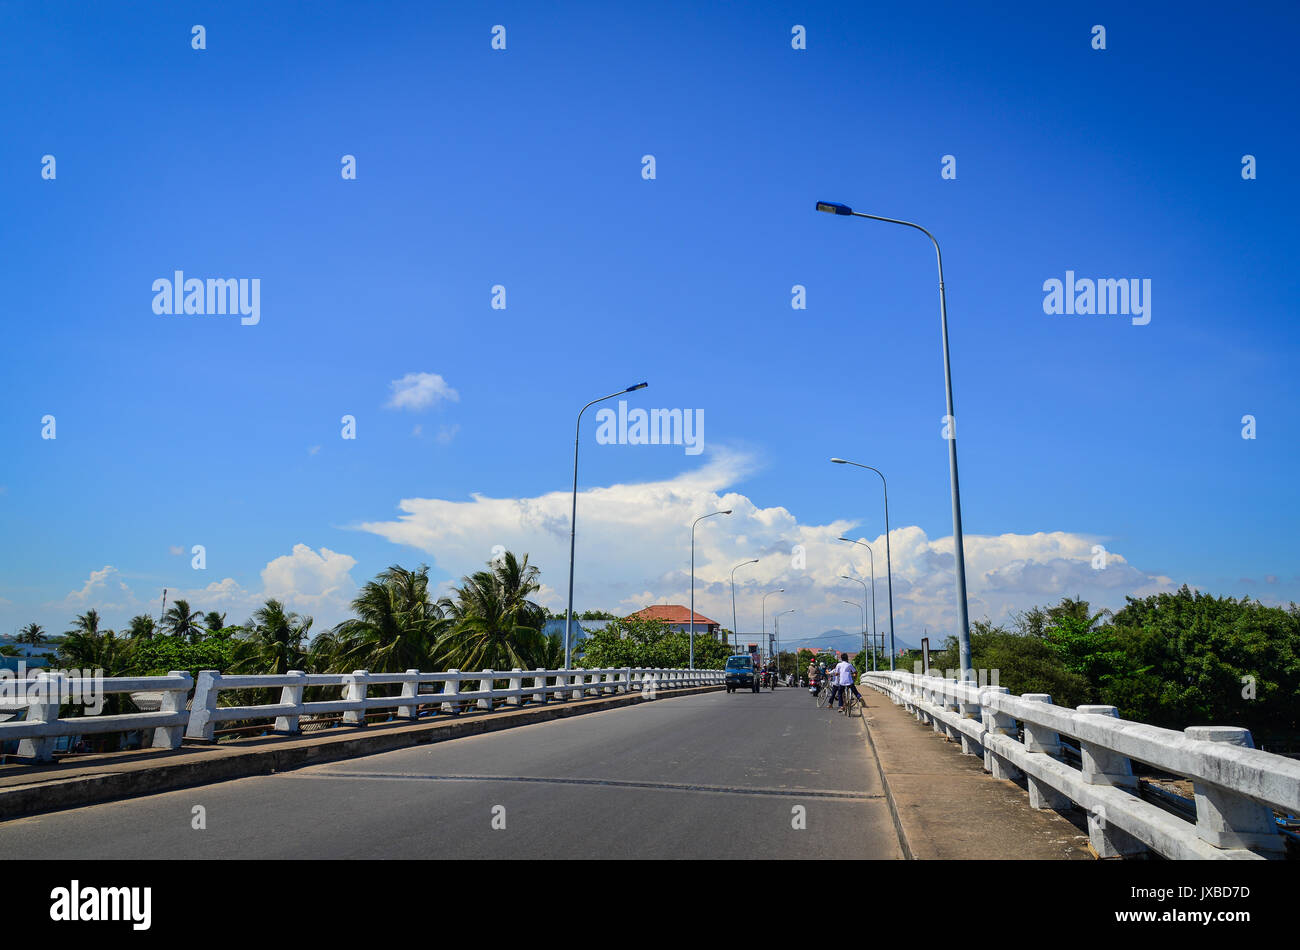 Traffic on the bridge in Phan Thiet, Vietnam. Phan Thiet is the capital of Binh Thuan Province and is surrounded by pristine beaches such as Mui Ne, K Stock Photo